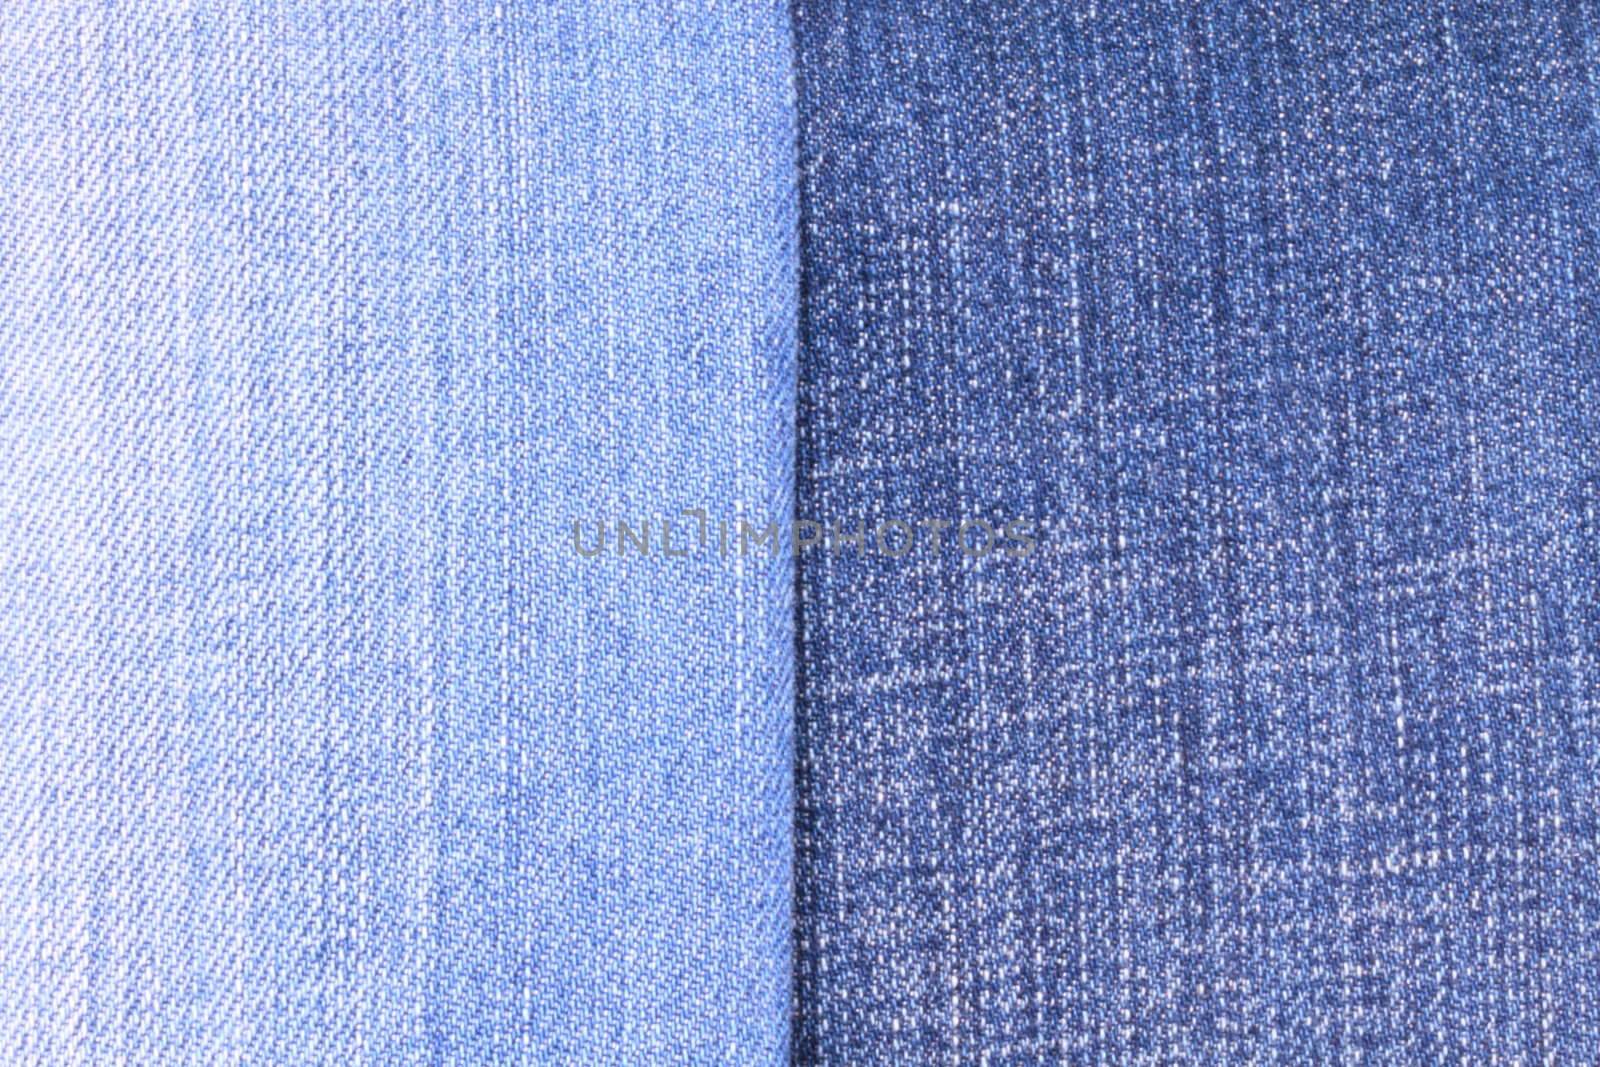 Jean cloth - macro of a jeans texture